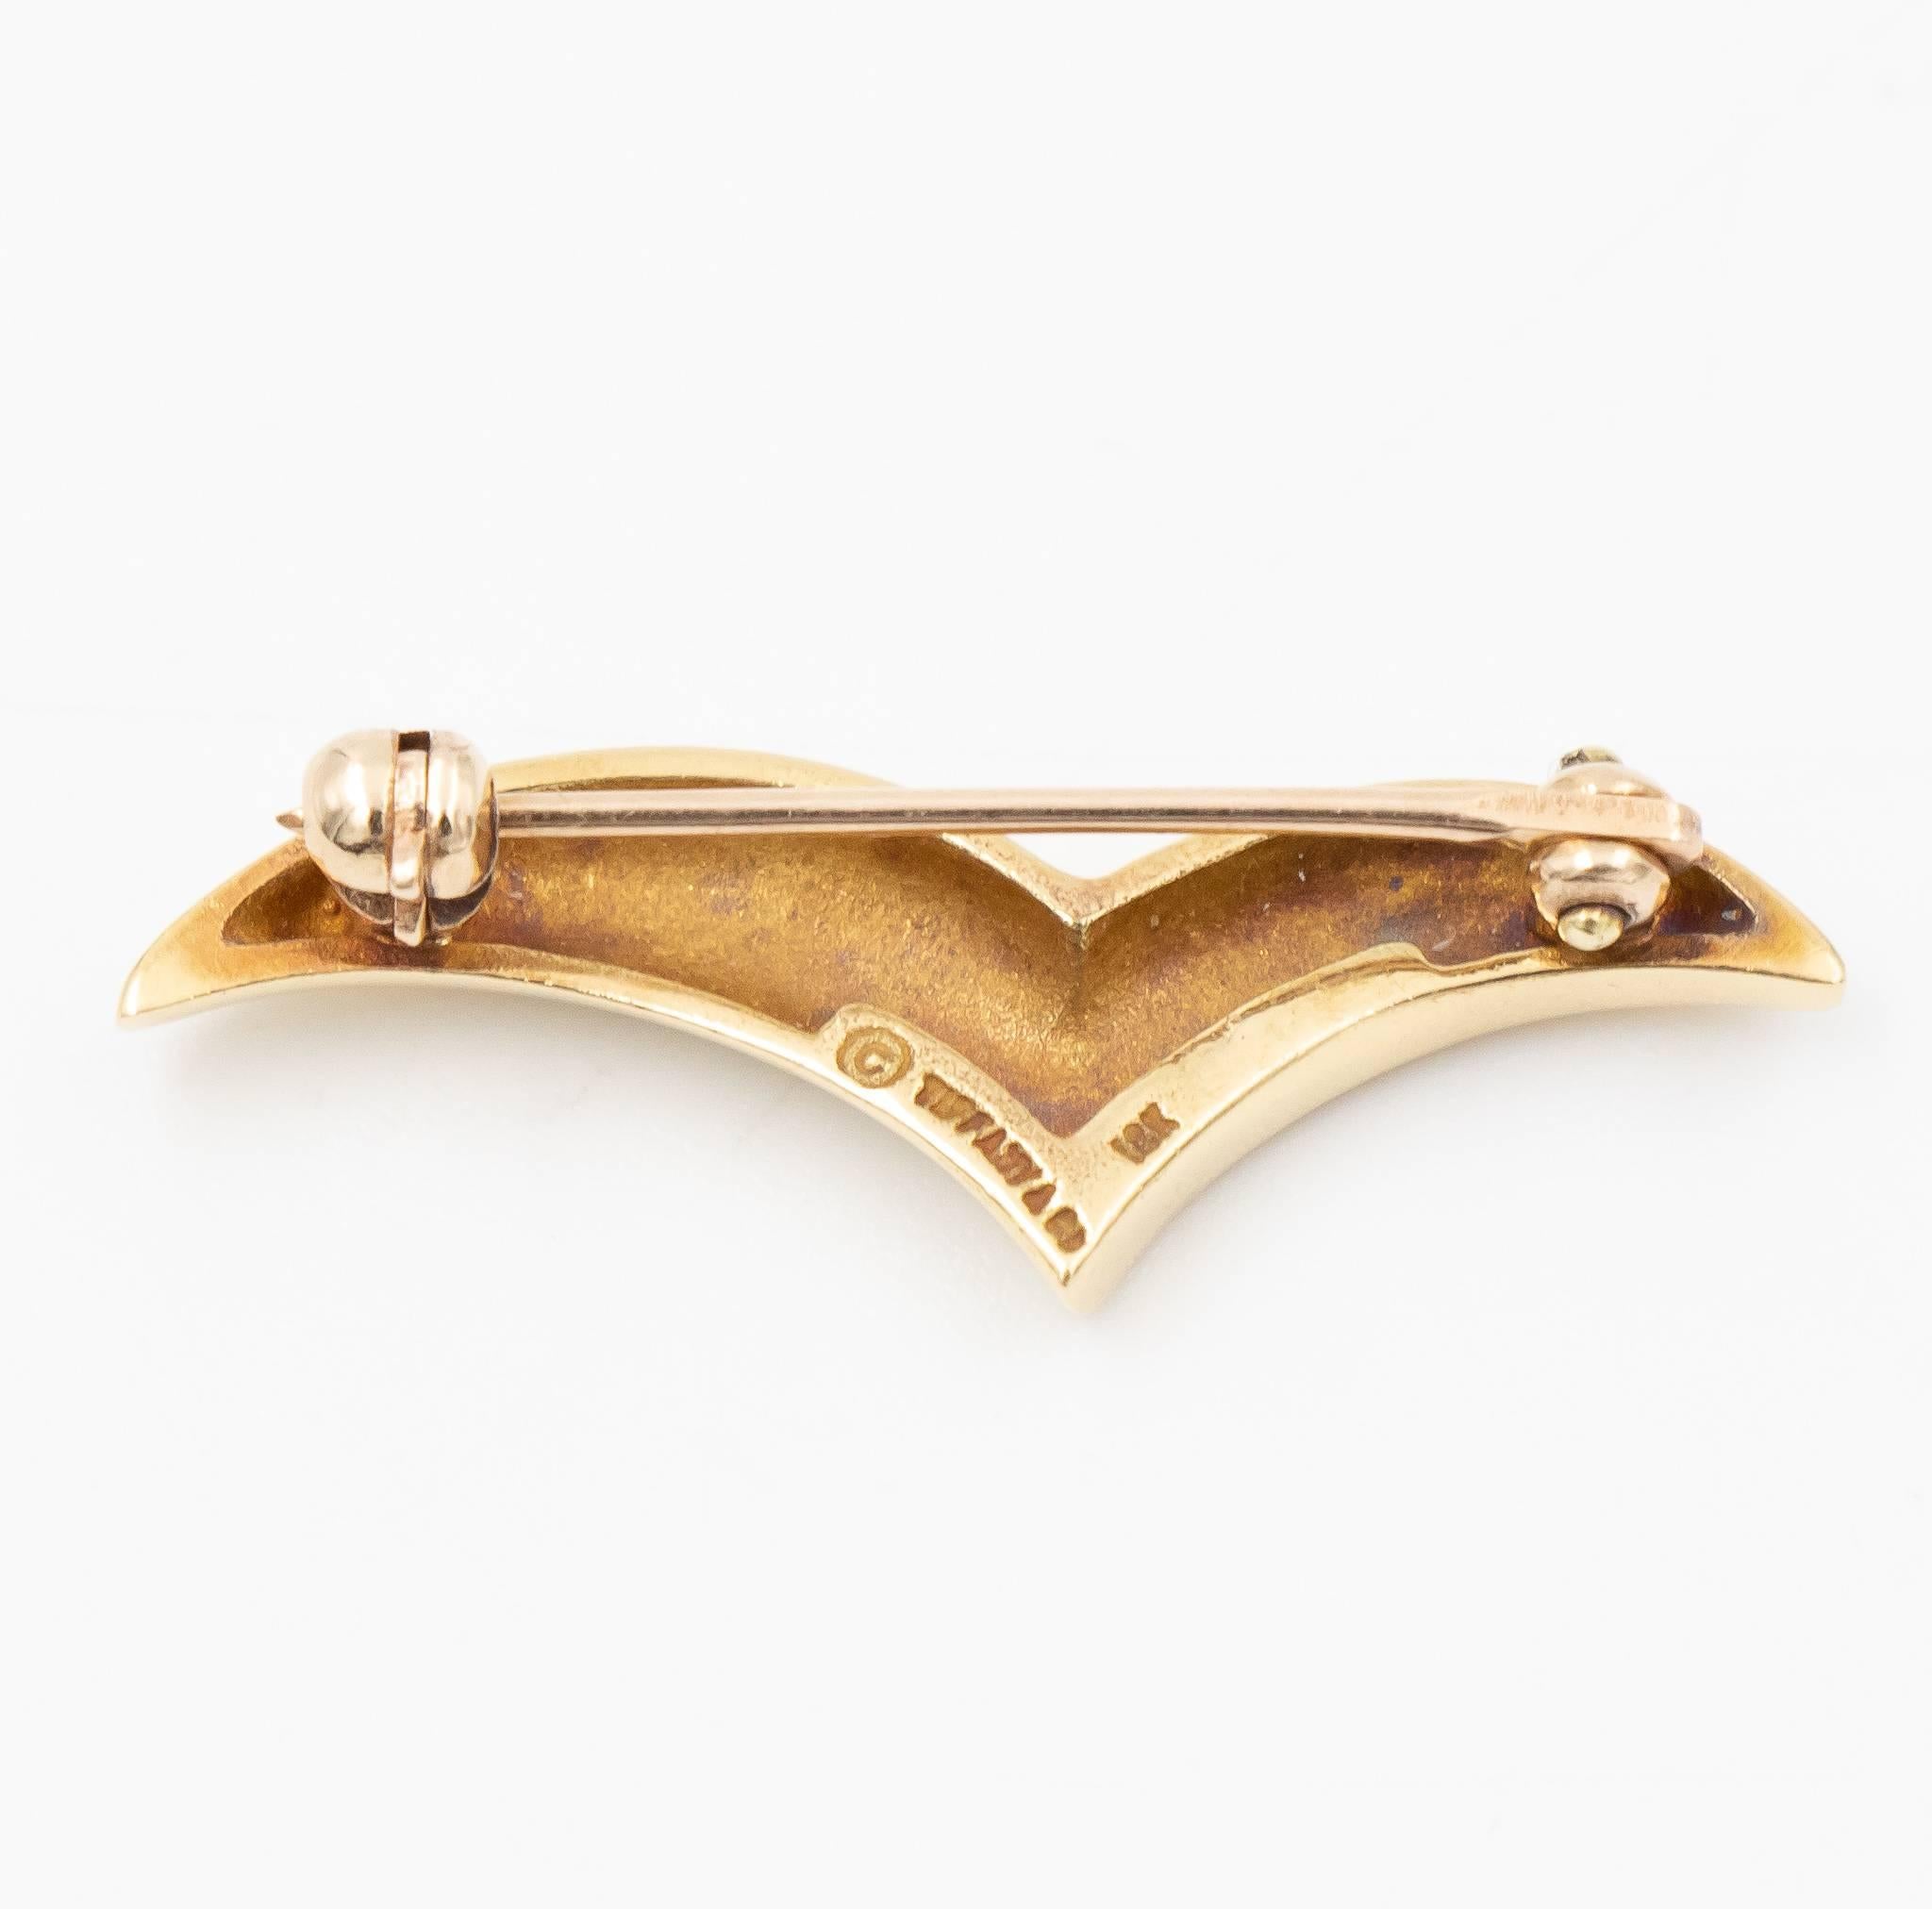 This V Brooch is known as the Seagull V Brooch by Tiffany & Co.  This was recently traded in to our store and is a unique, classic and simple design which can be worn for an every-day brooch style.  This is a great Tiffany & Co. icon and please let